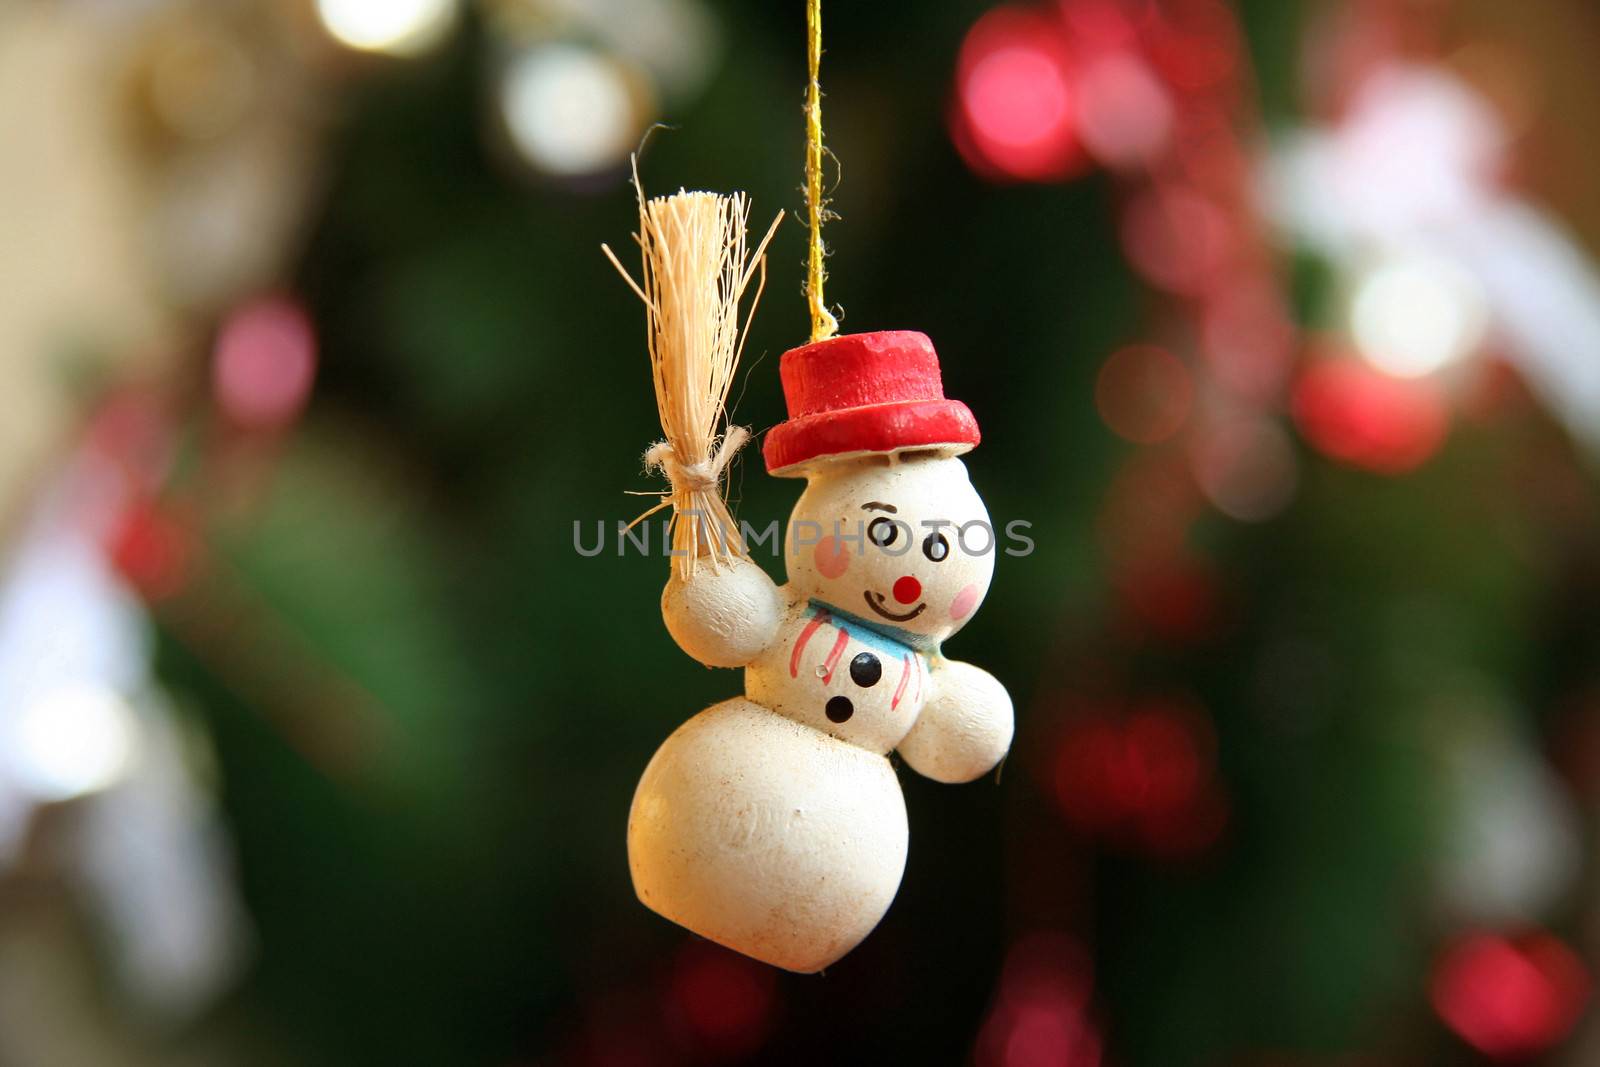 Snowman Christmas tree decoration with red hat and holding sheaf of corn is hanging by a thread  with dark green fir tree background.